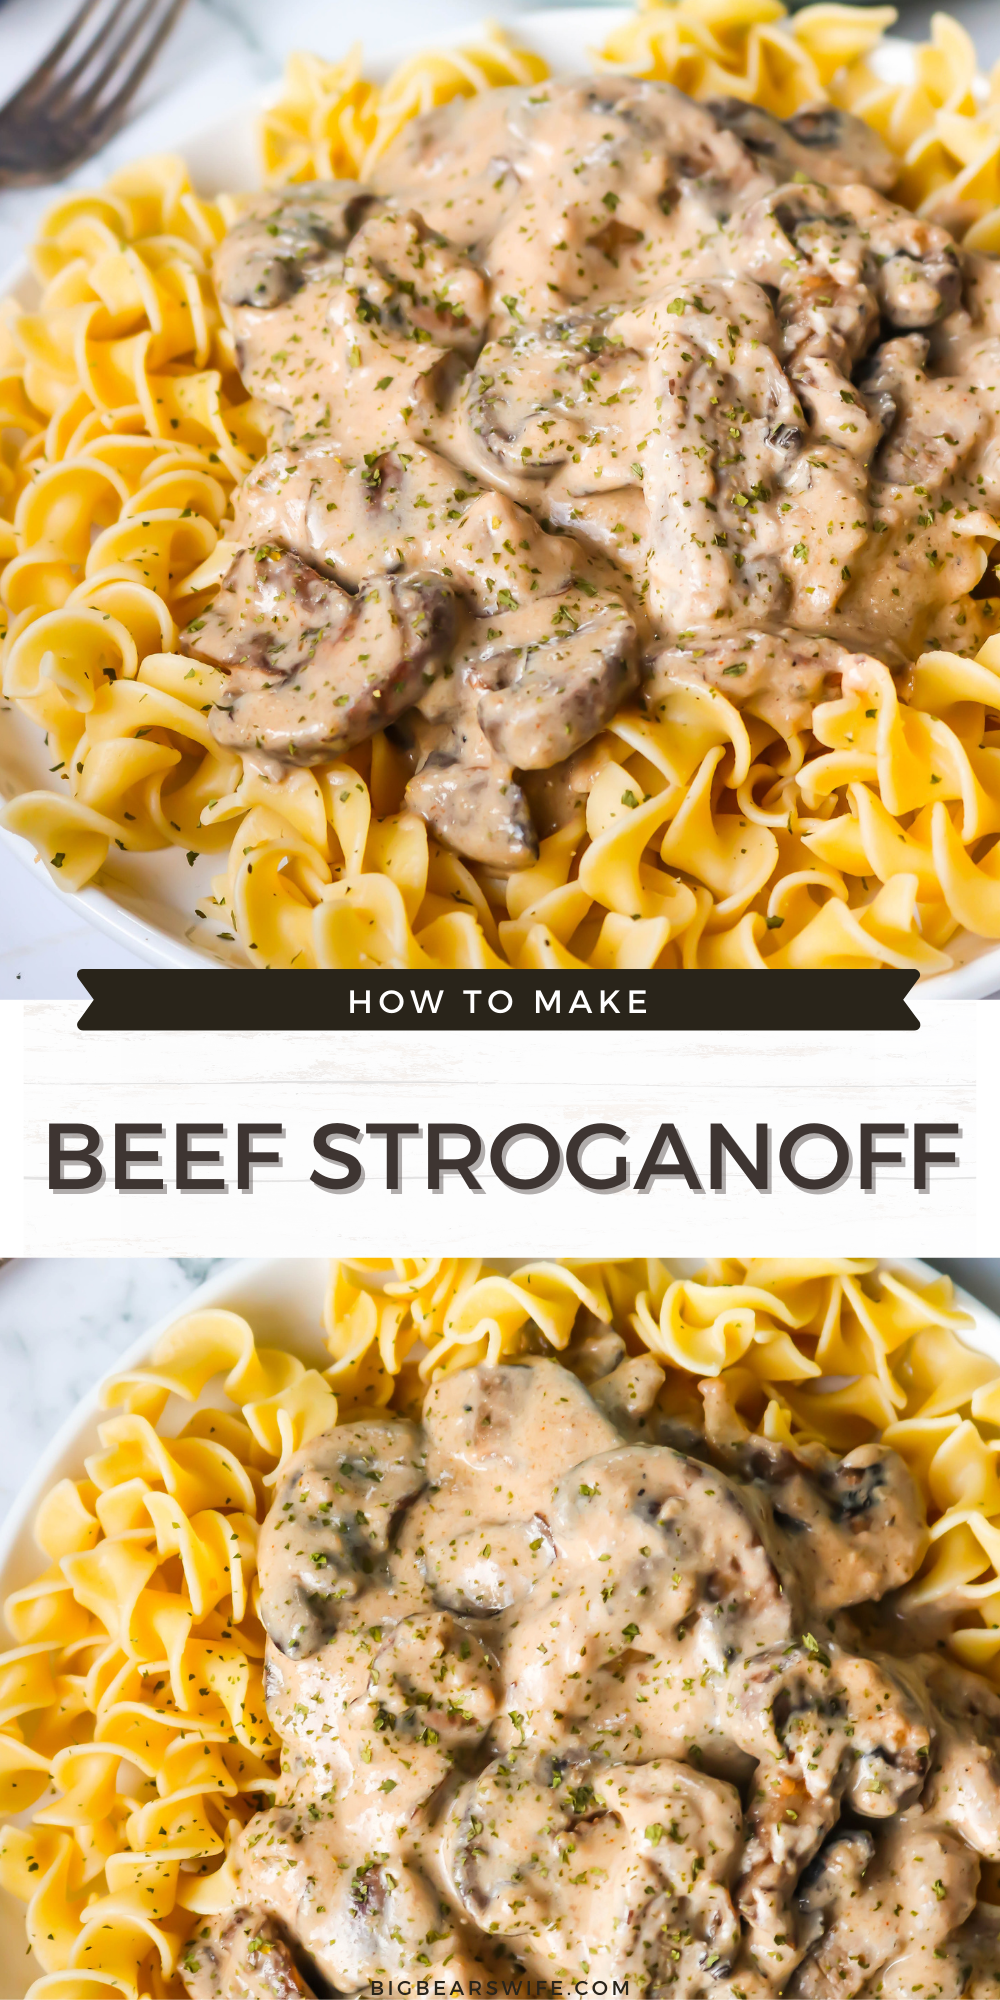 This super easy Beef Stroganoff is cooked with stripes of beef and lots of mushrooms is a delicious, creamy Stroganoff sauce. Perfect when served over egg noodles, rice or mashed potatoes.  via @bigbearswife